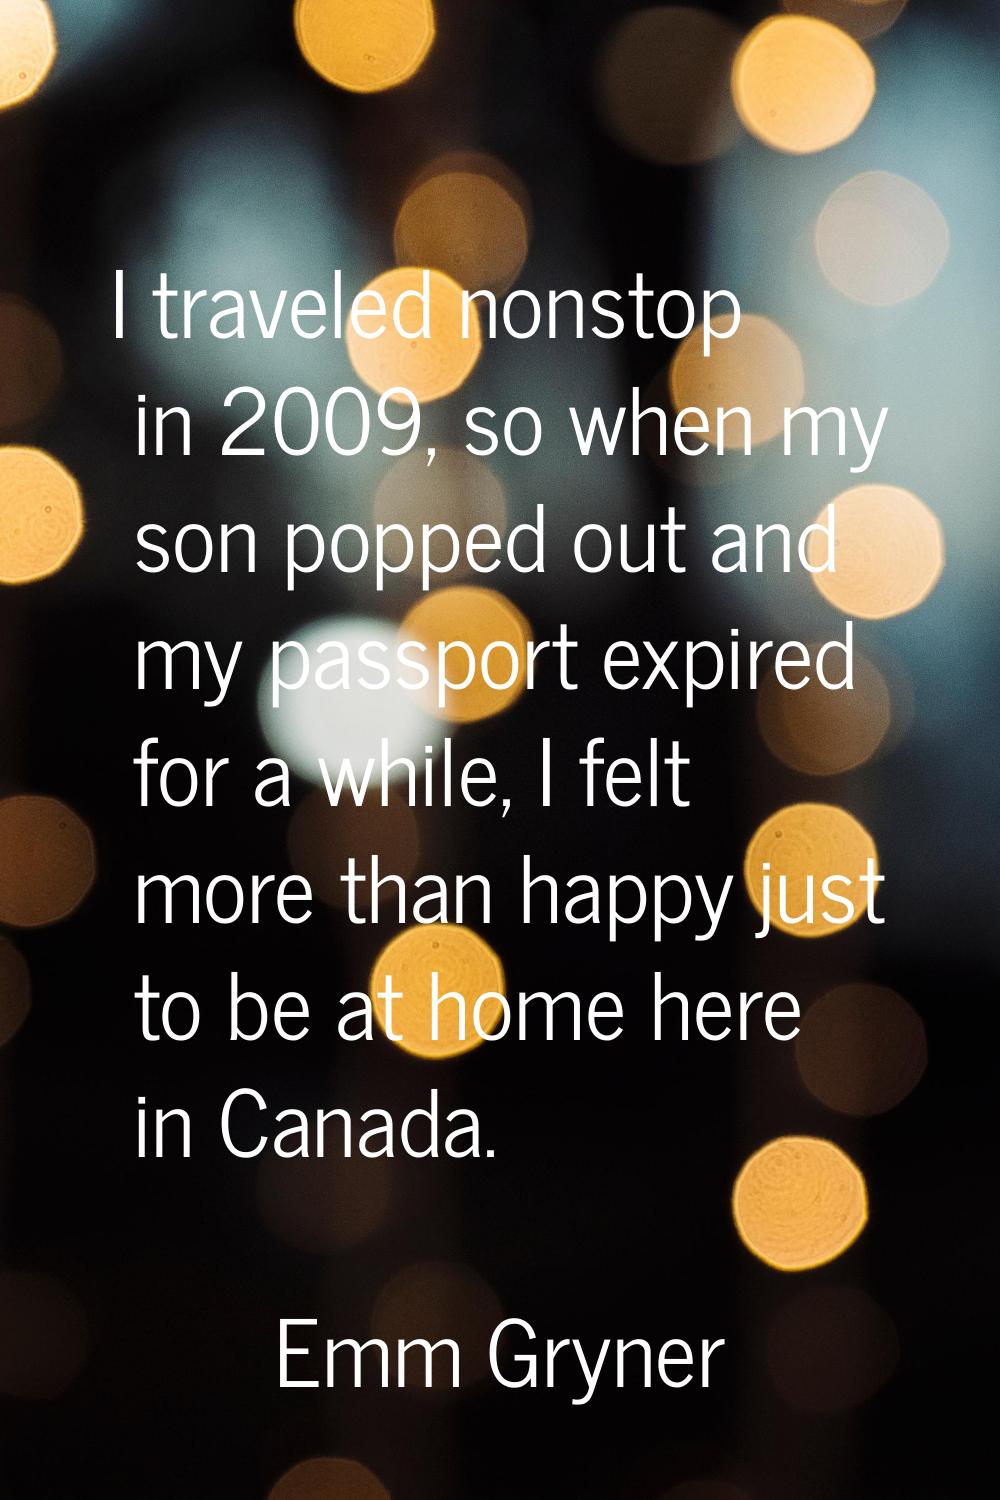 I traveled nonstop in 2009, so when my son popped out and my passport expired for a while, I felt m